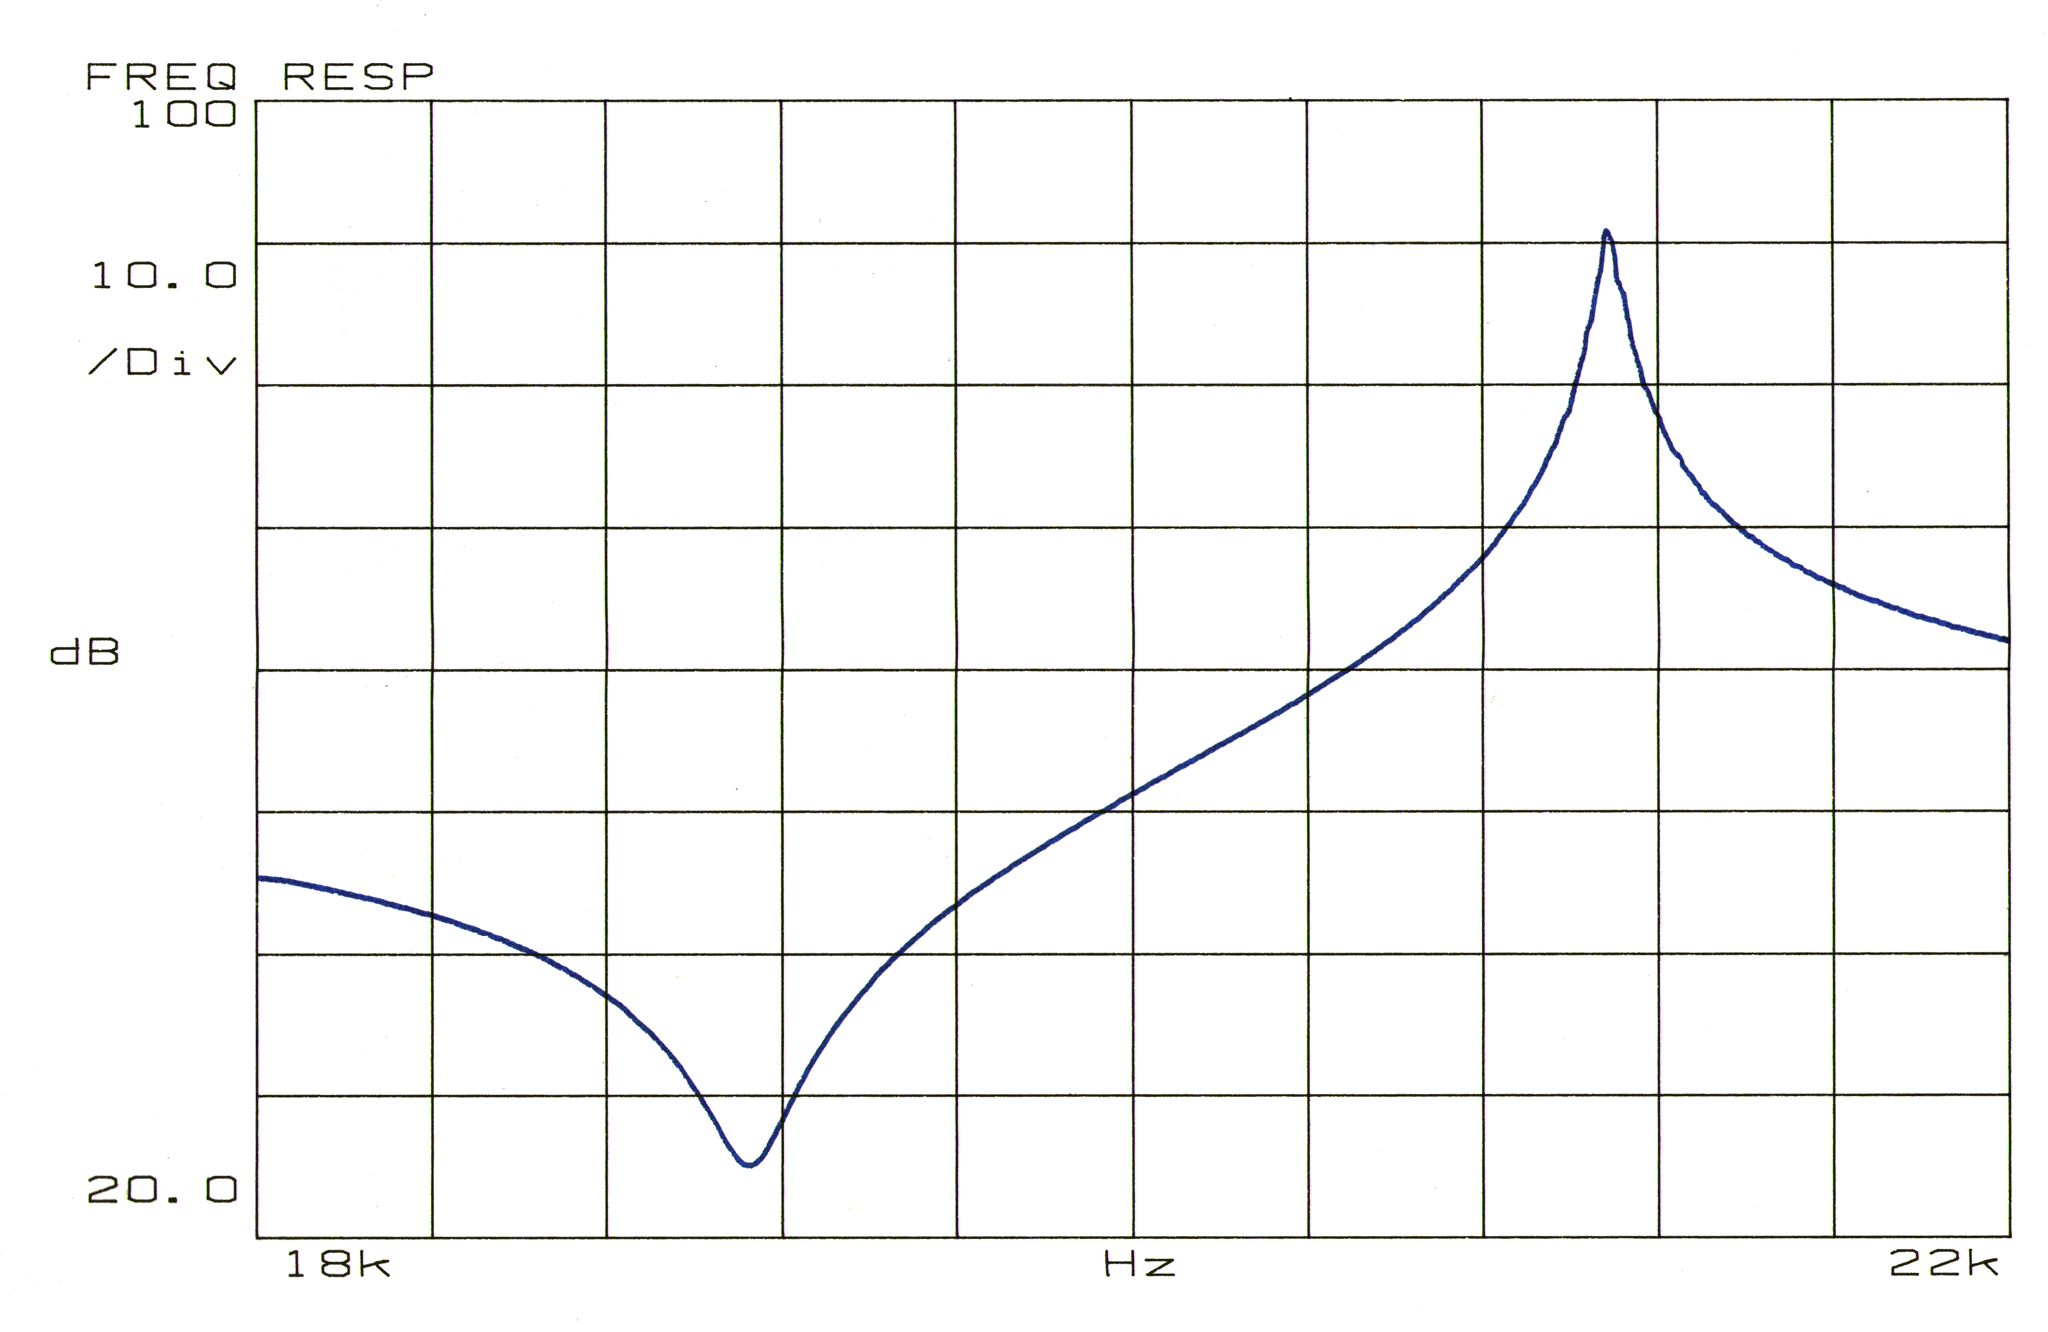 Frequency response impedance plot for a 20 kHz ultrasonic transducer